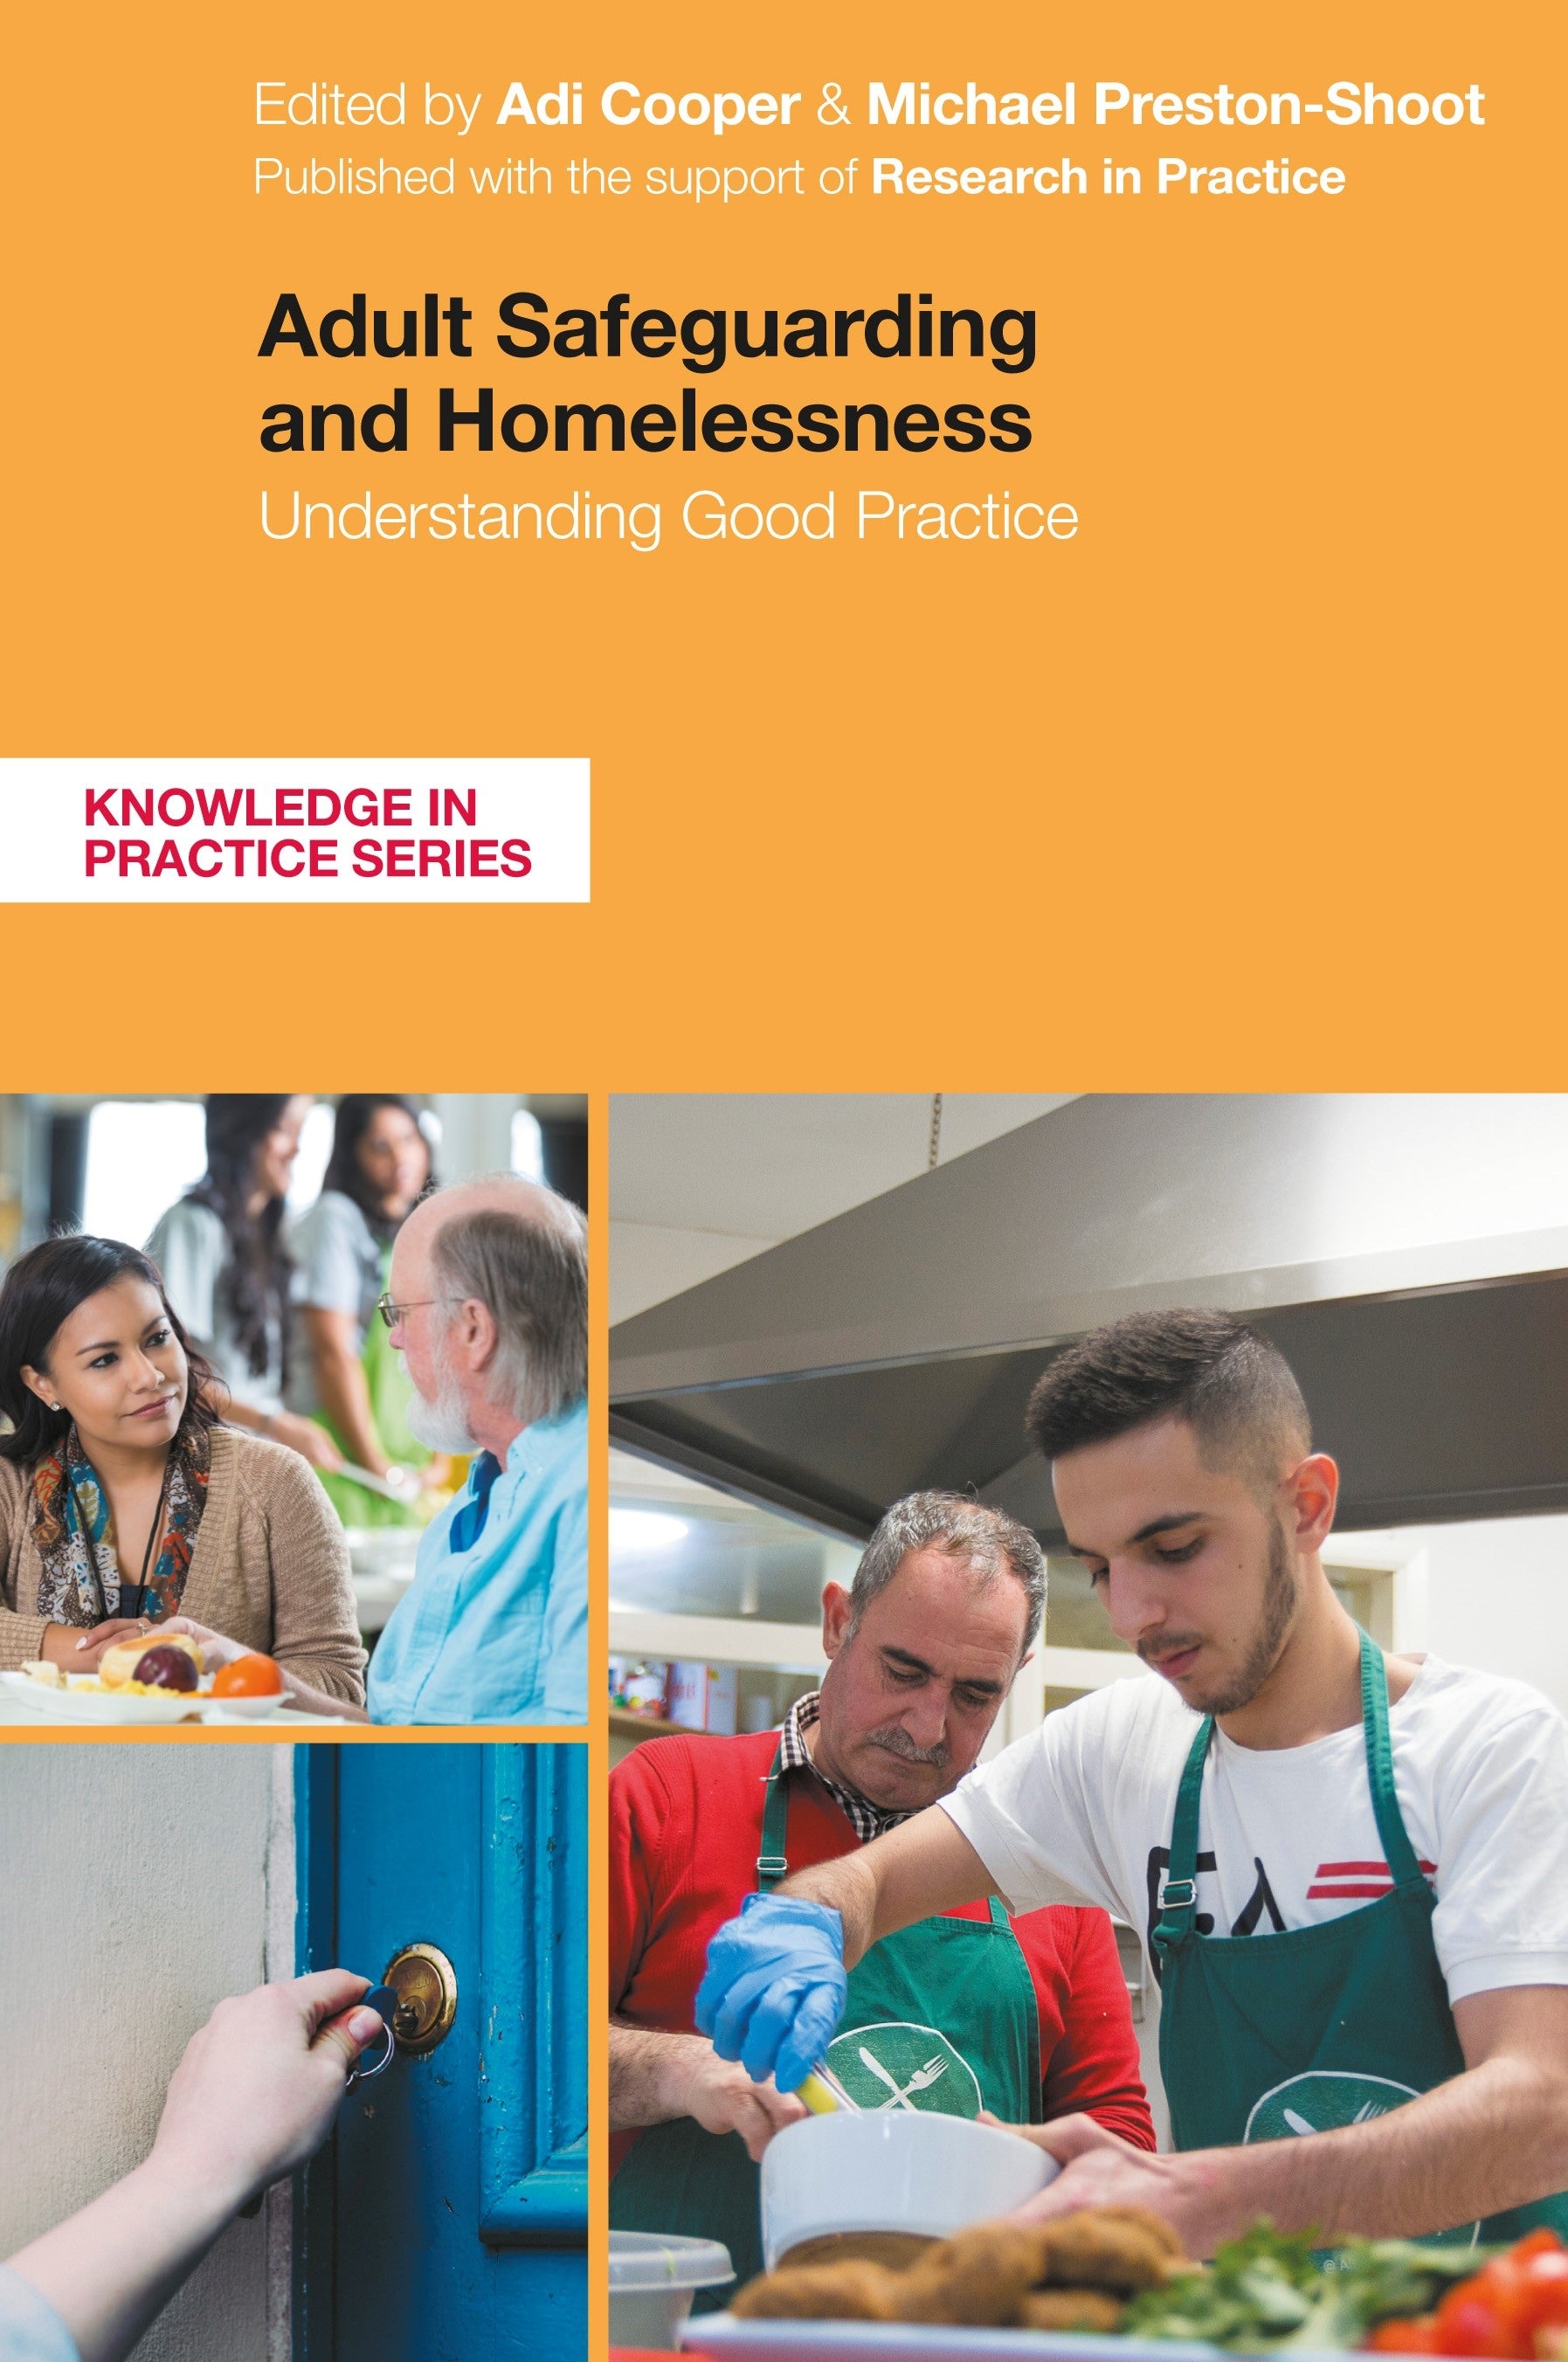 Adult Safeguarding and Homelessness by Michael Preston-Shoot, Adi Cooper, No Author Listed